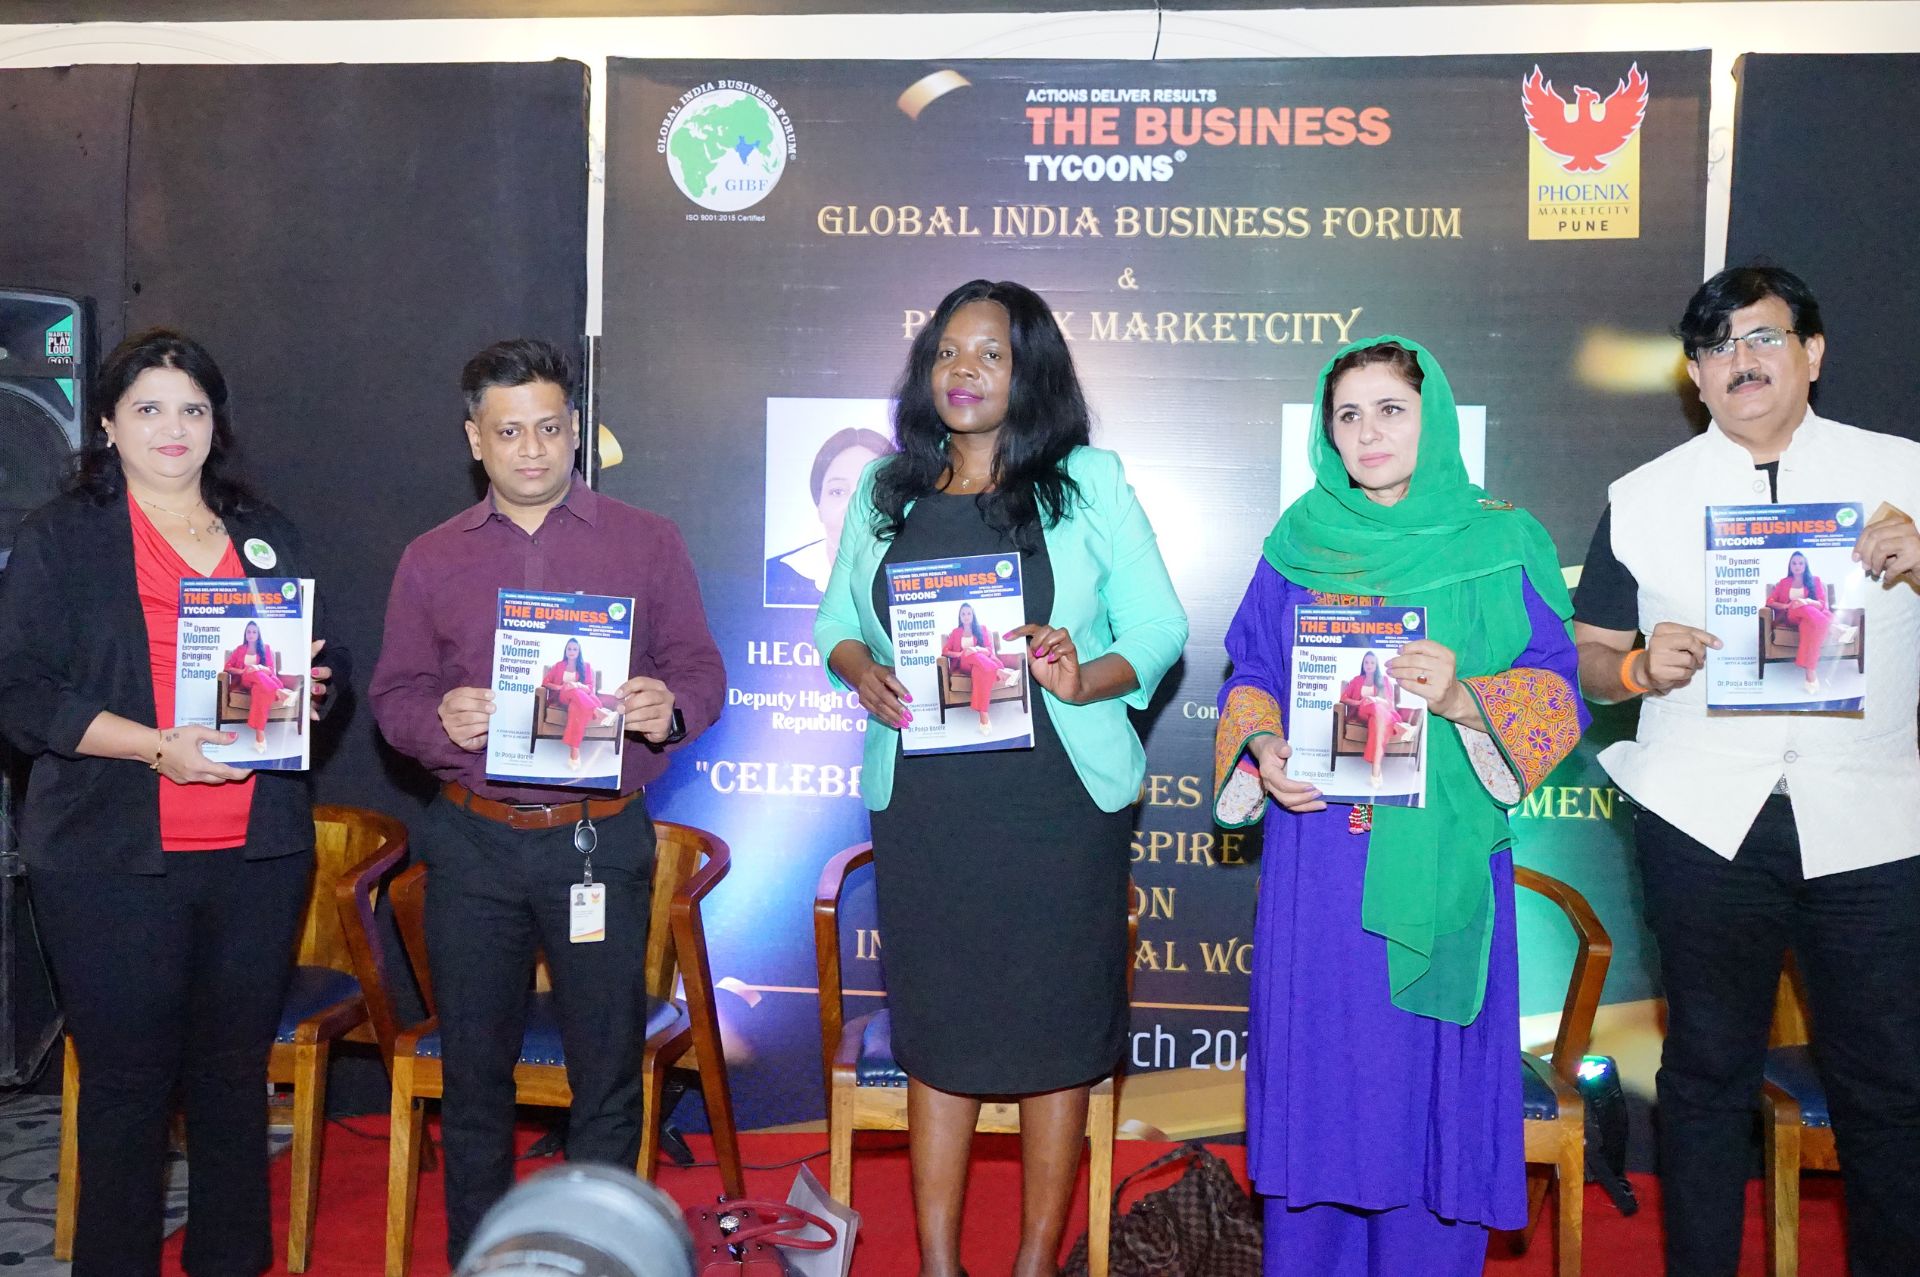 inauguration-of-the-business-tycoons-magazine-the-dynamic-women-entrepreneurs-bringing-about-a-change